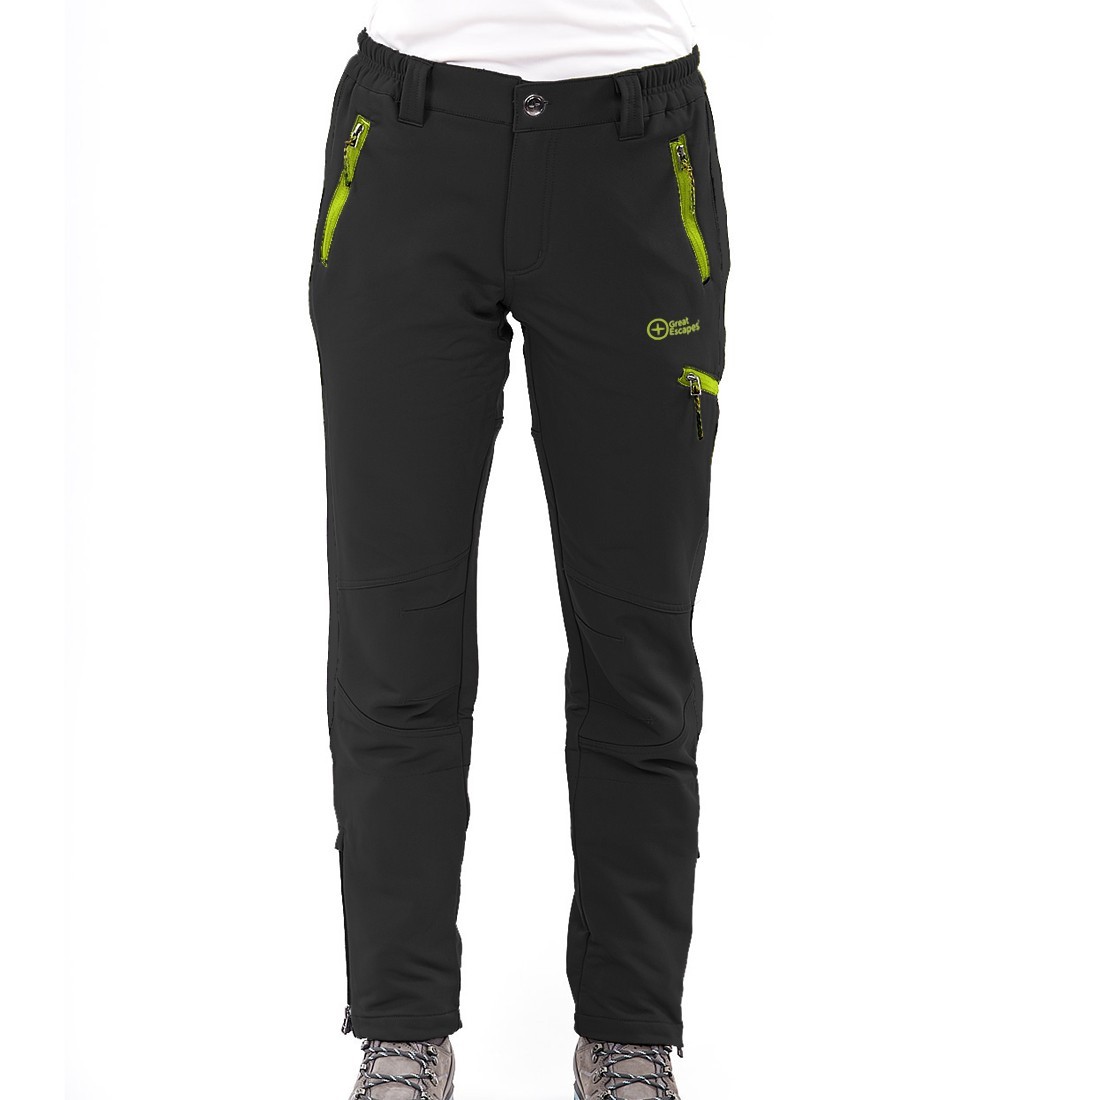 ELBRUS - Technical water-repellent lady pant